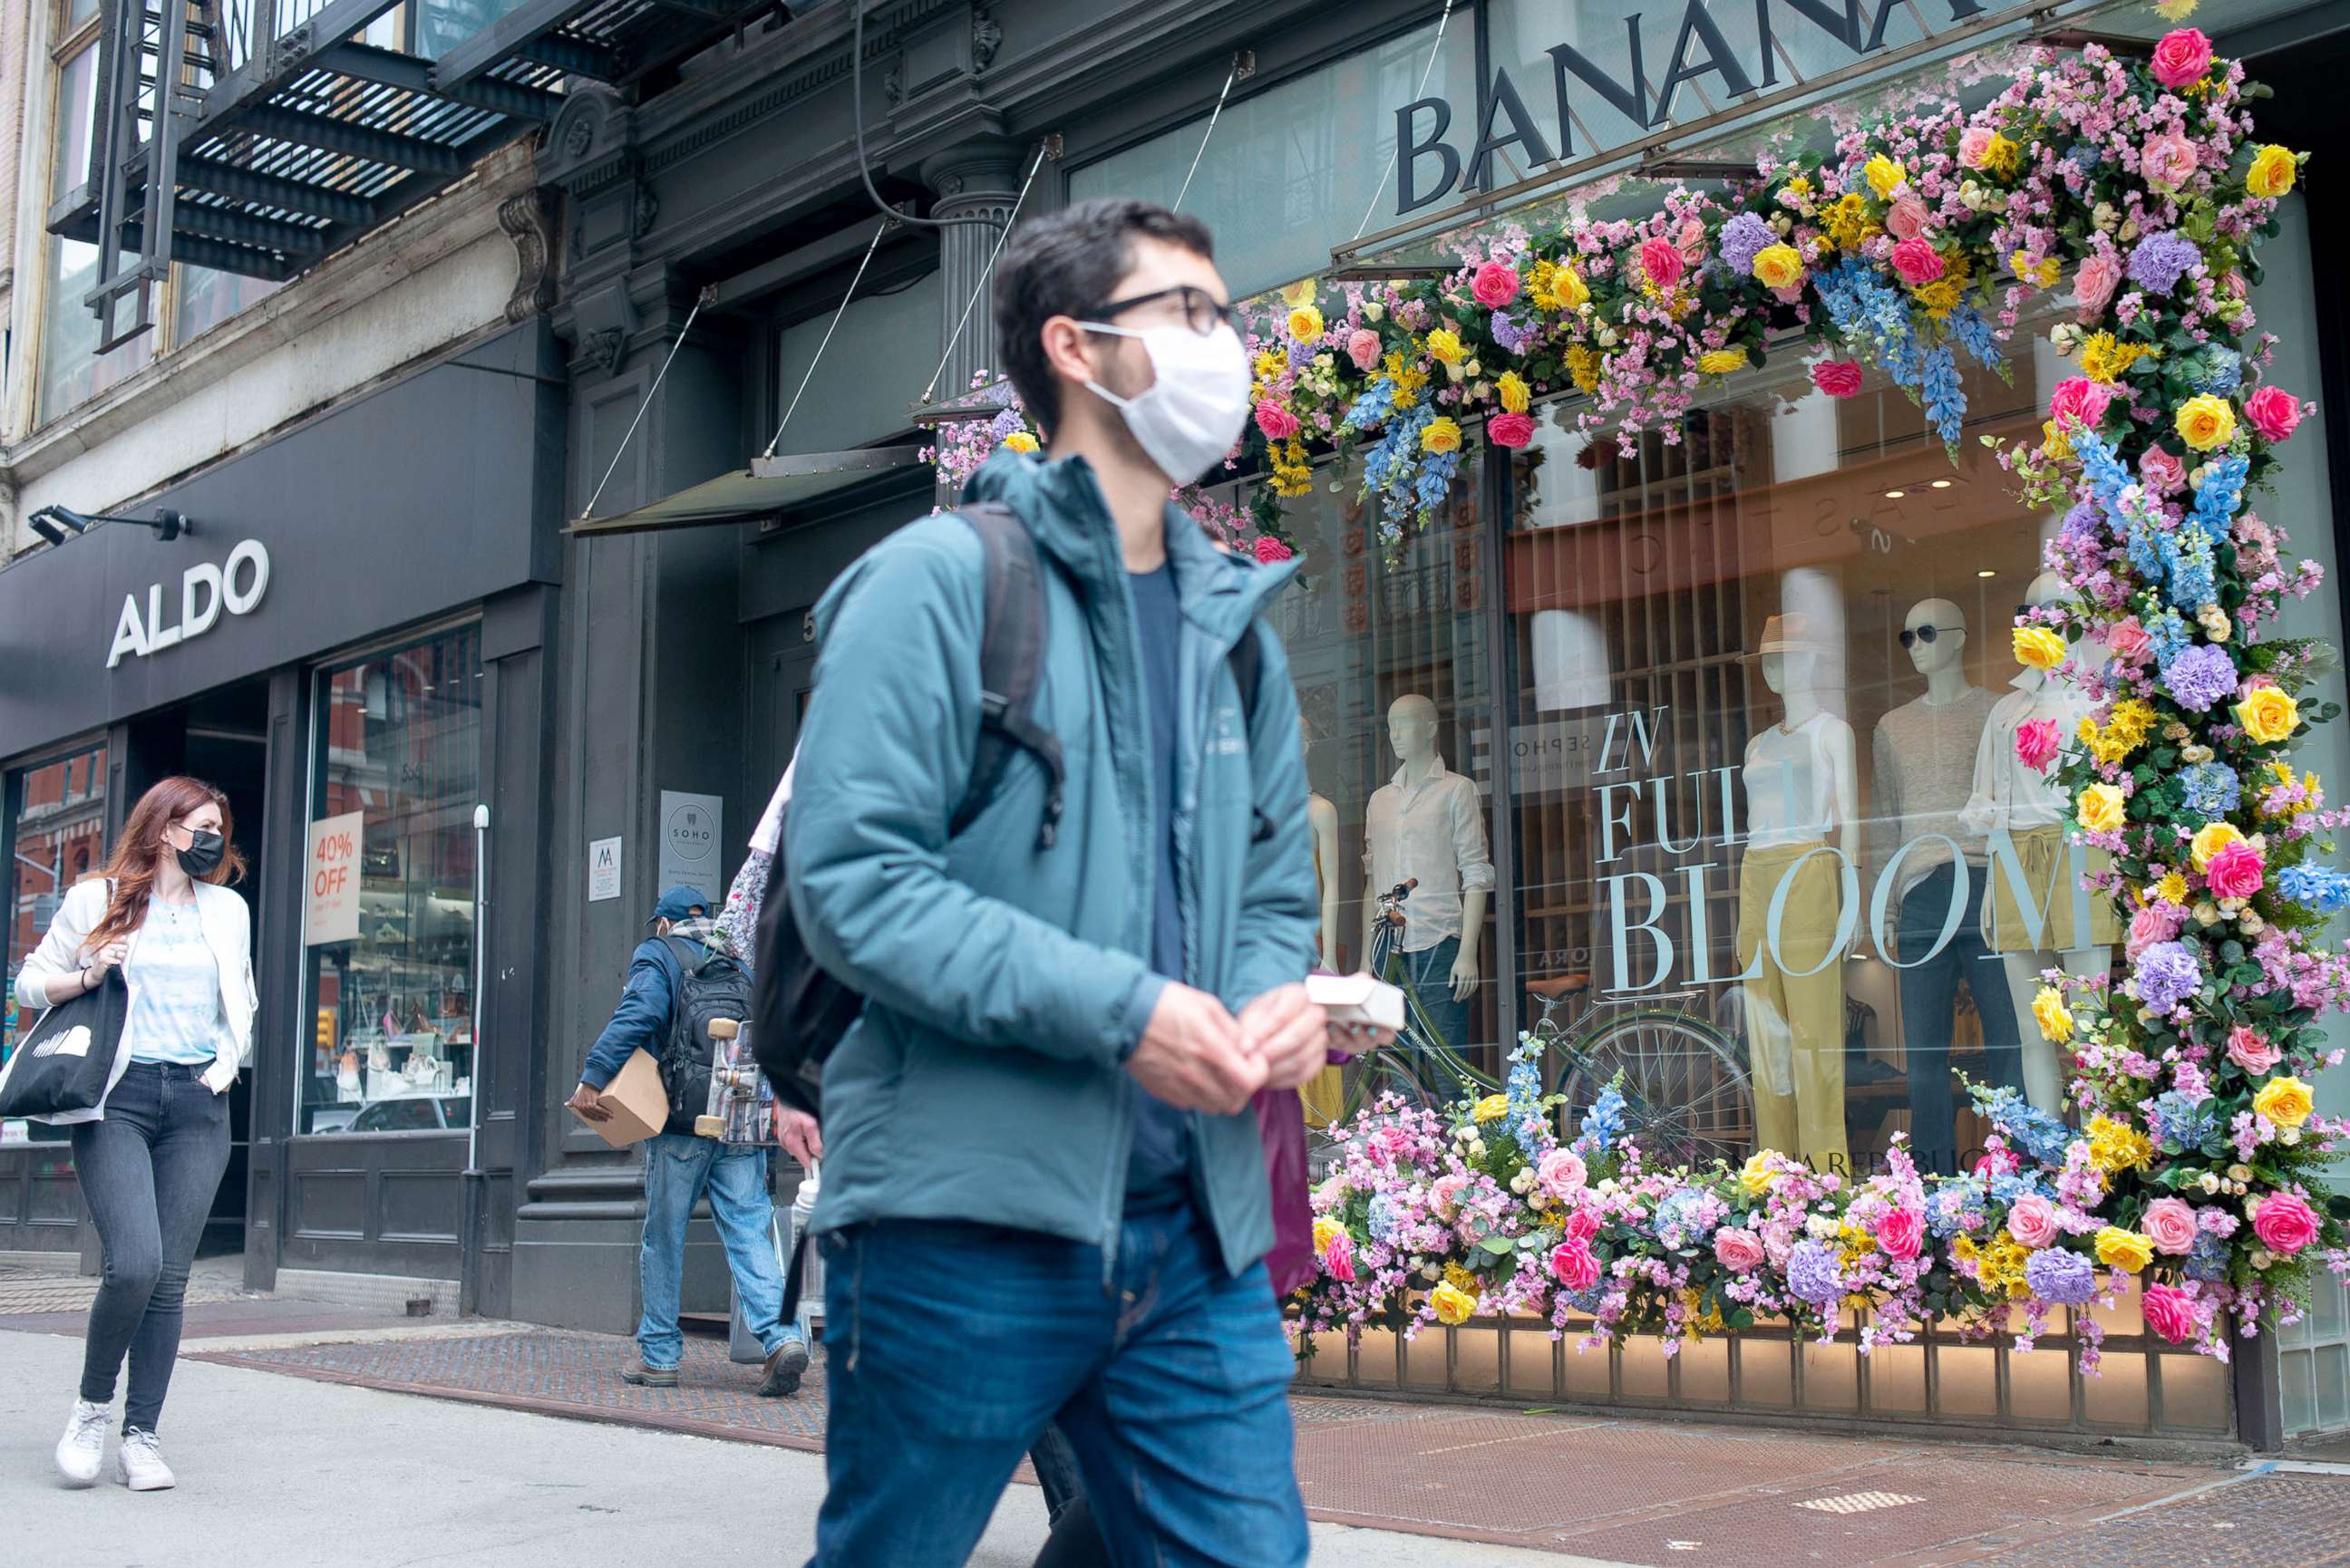 PHOTO: Pedestrians wear masks as they walk past a flower decoration at Banana Republic in the SoHo neighborhood of New York, March 25, 2021.